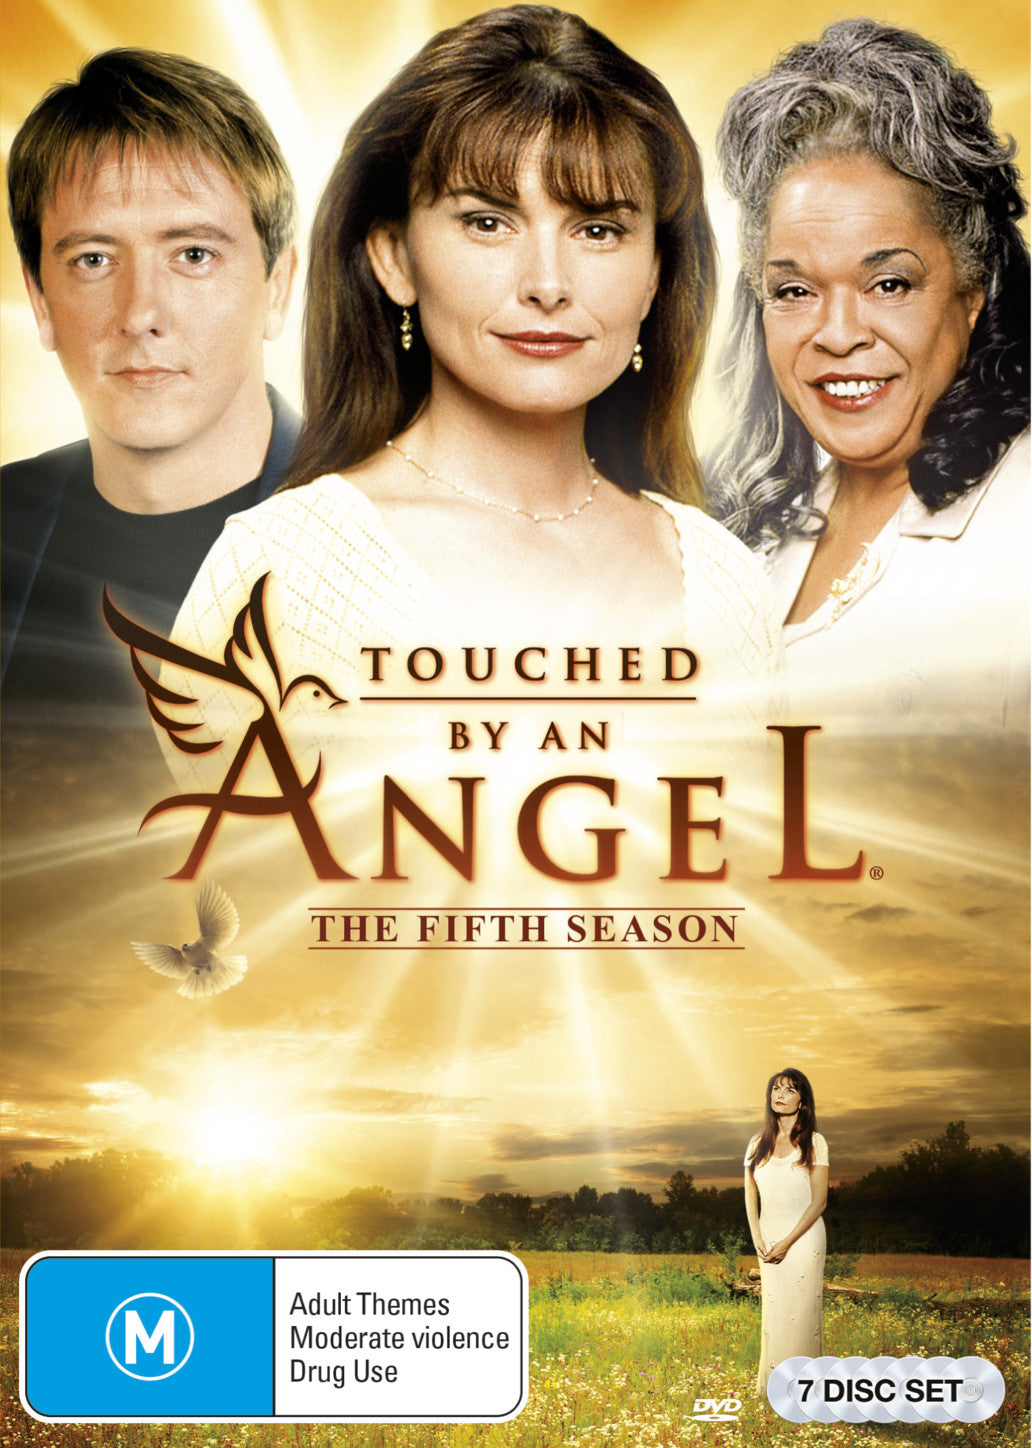 TOUCHED BY AN ANGEL SEASON 5